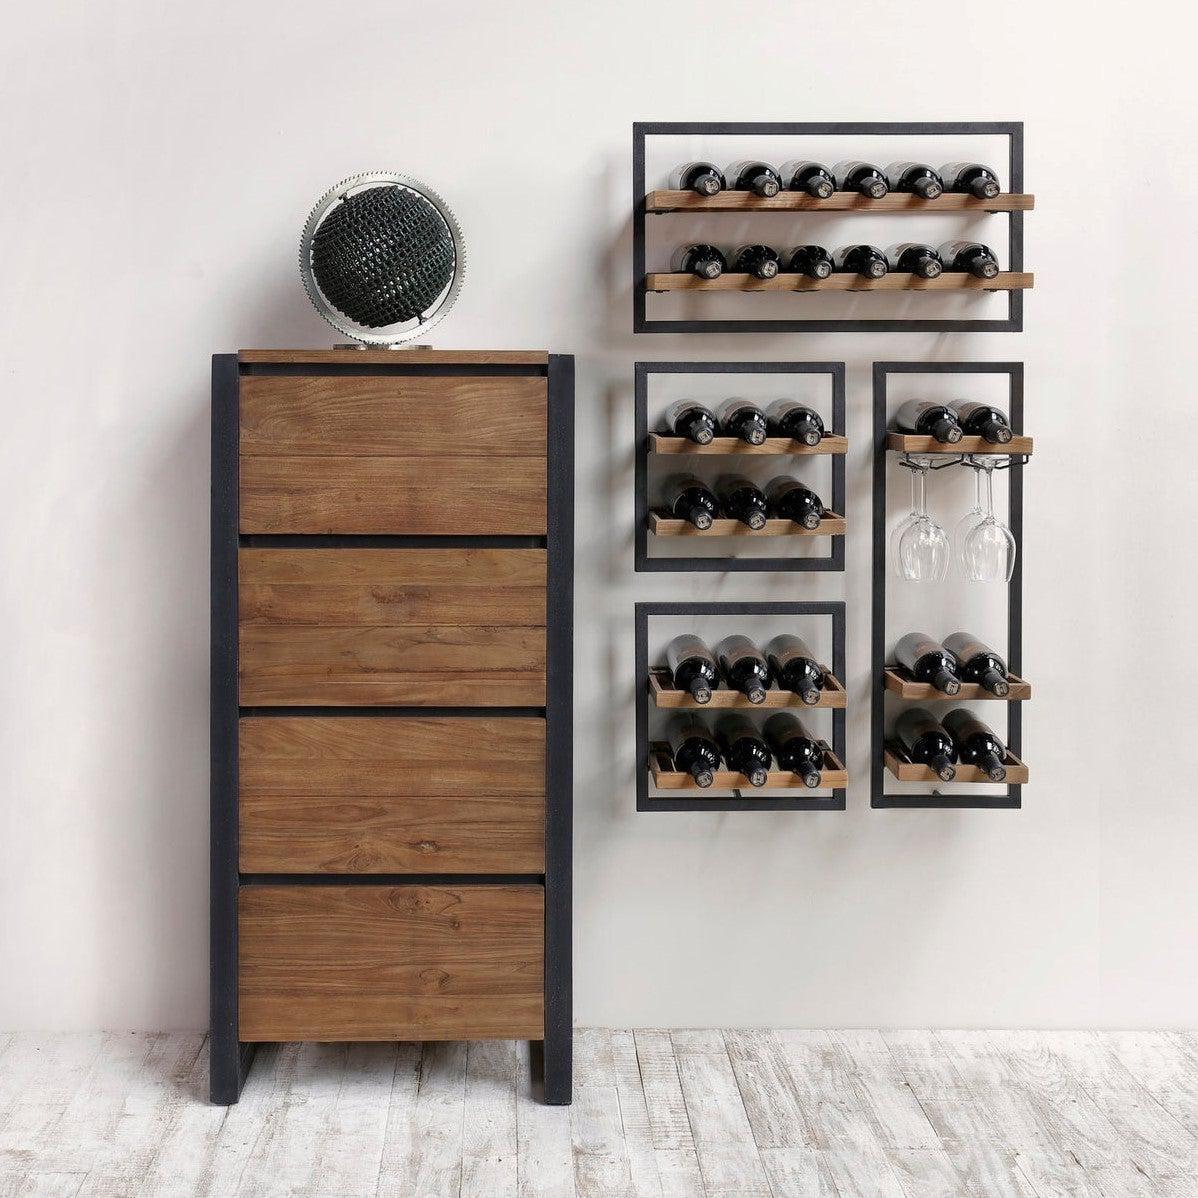 Reclaimed Wood 6 Bottles Wine Rack With Glass Holder Wall Shelf Mix and Match - Sideboards and Things Brand_LH Imports, Features_Repurposed Materials, Finish_Natural, Finish_Rustic, Game Room, Materials_Reclaimed Wood, Materials_Wood, Product Type_Bar Cart